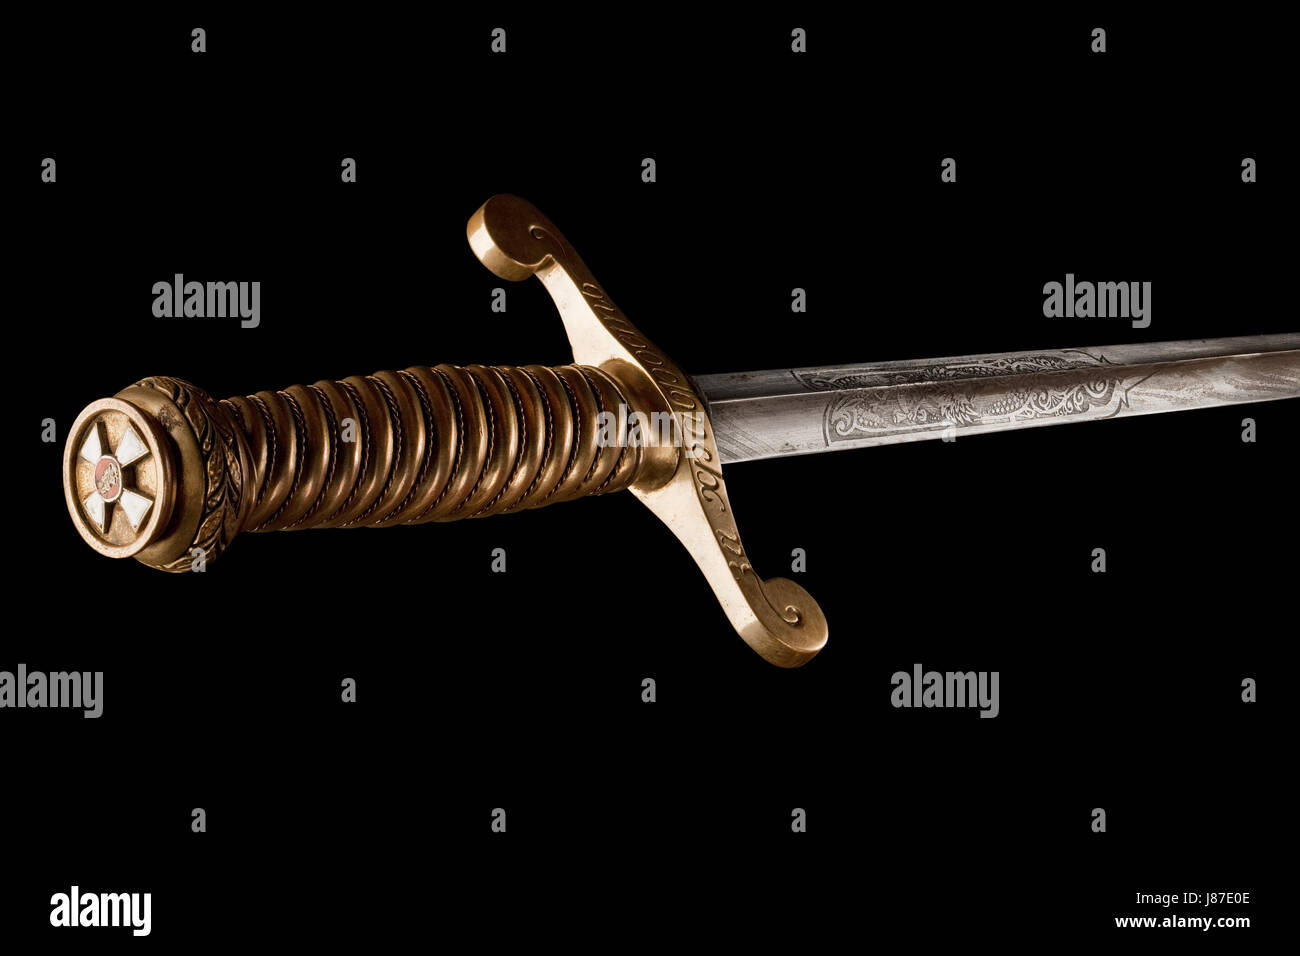 antique, vintage, sword, arm, weapon, blade, knive, knife, single, historical, Stock Photo